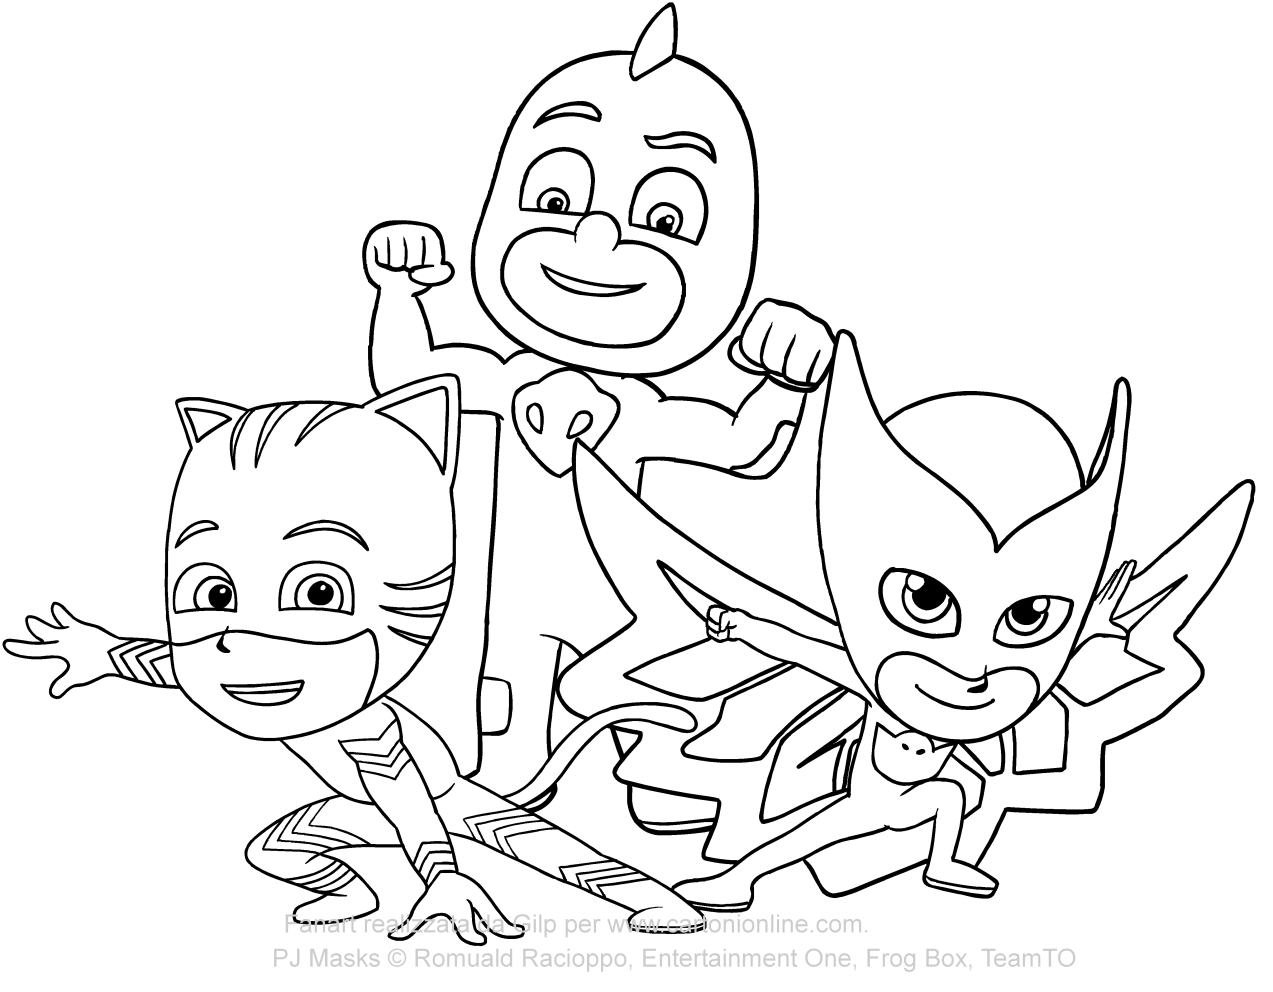 PJ Masks coloring page to print